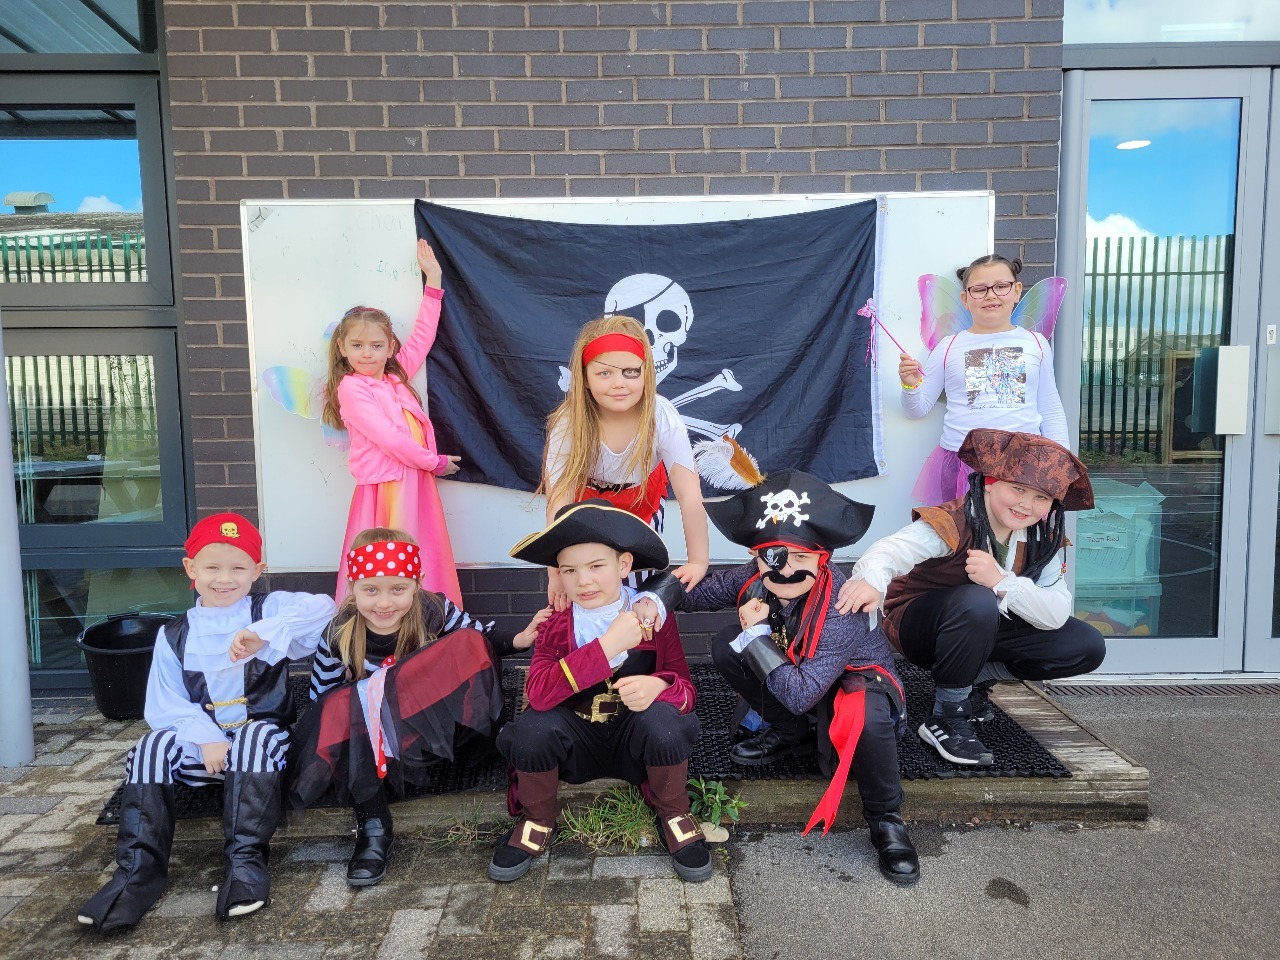 Pirates and Pixies fundraising day at Gwenfro CP School.